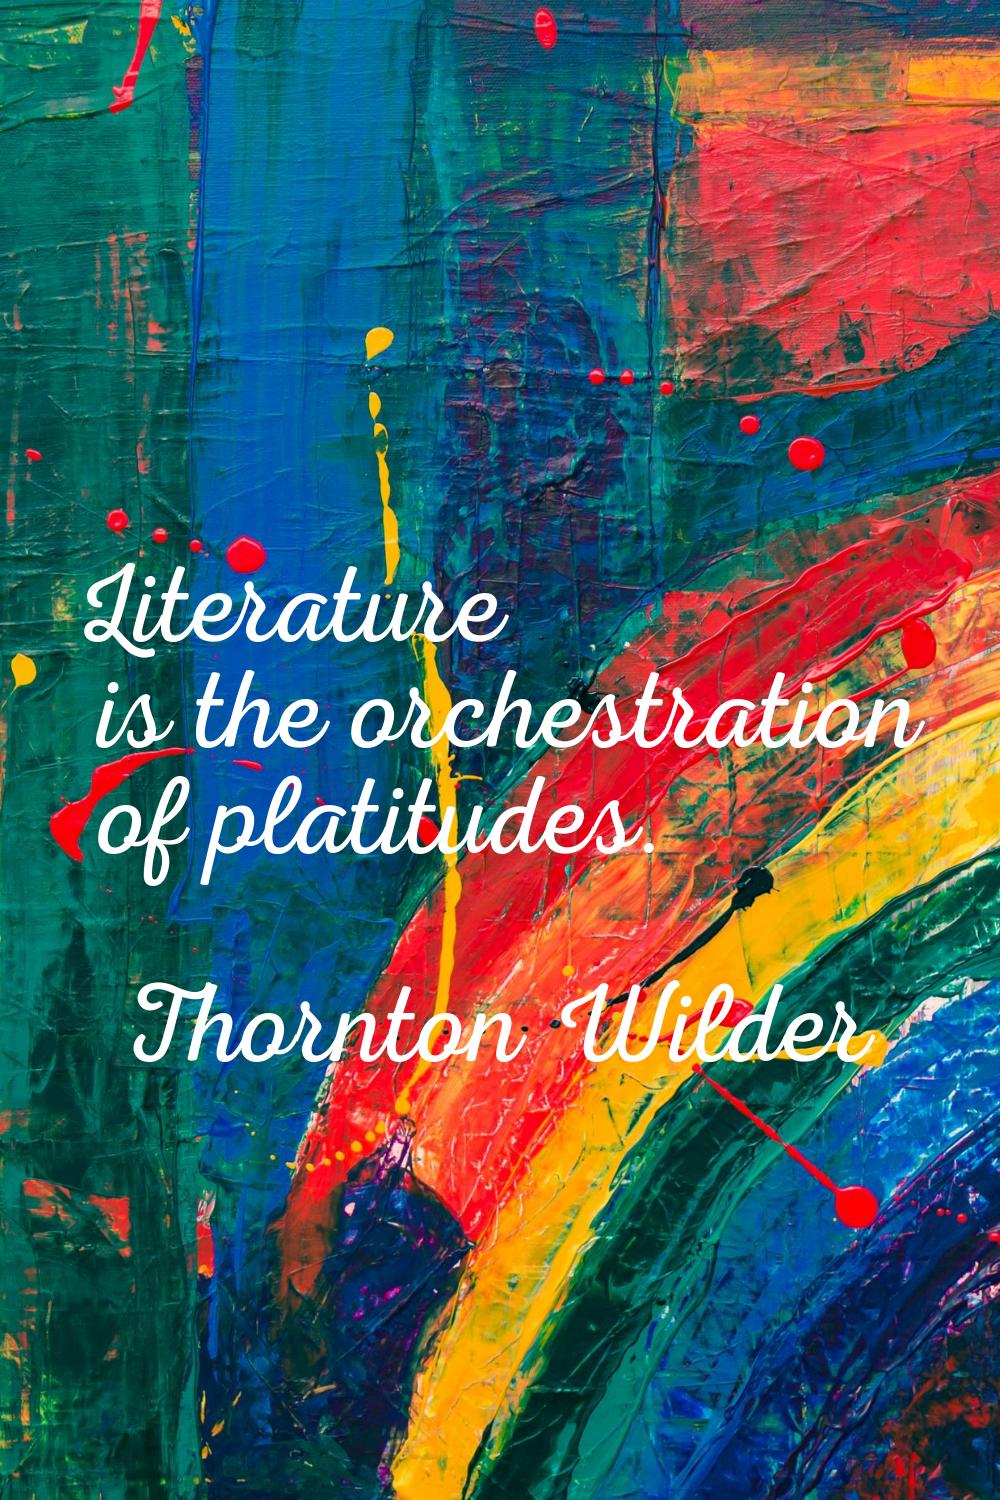 Literature is the orchestration of platitudes.